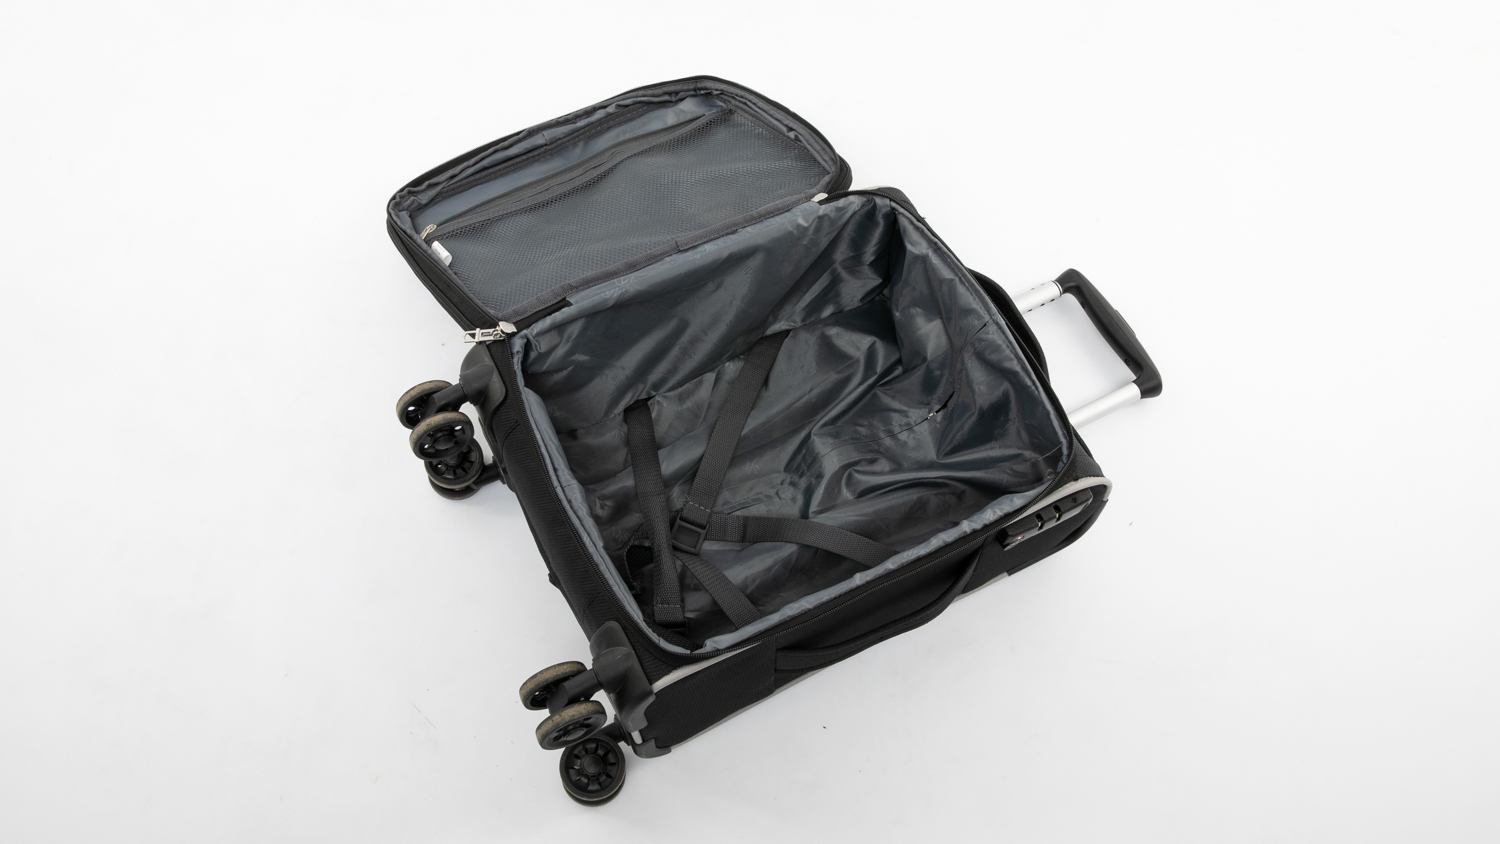 Aldi Skylite Luggage Soft Case Carry On Review Luggage CHOICE